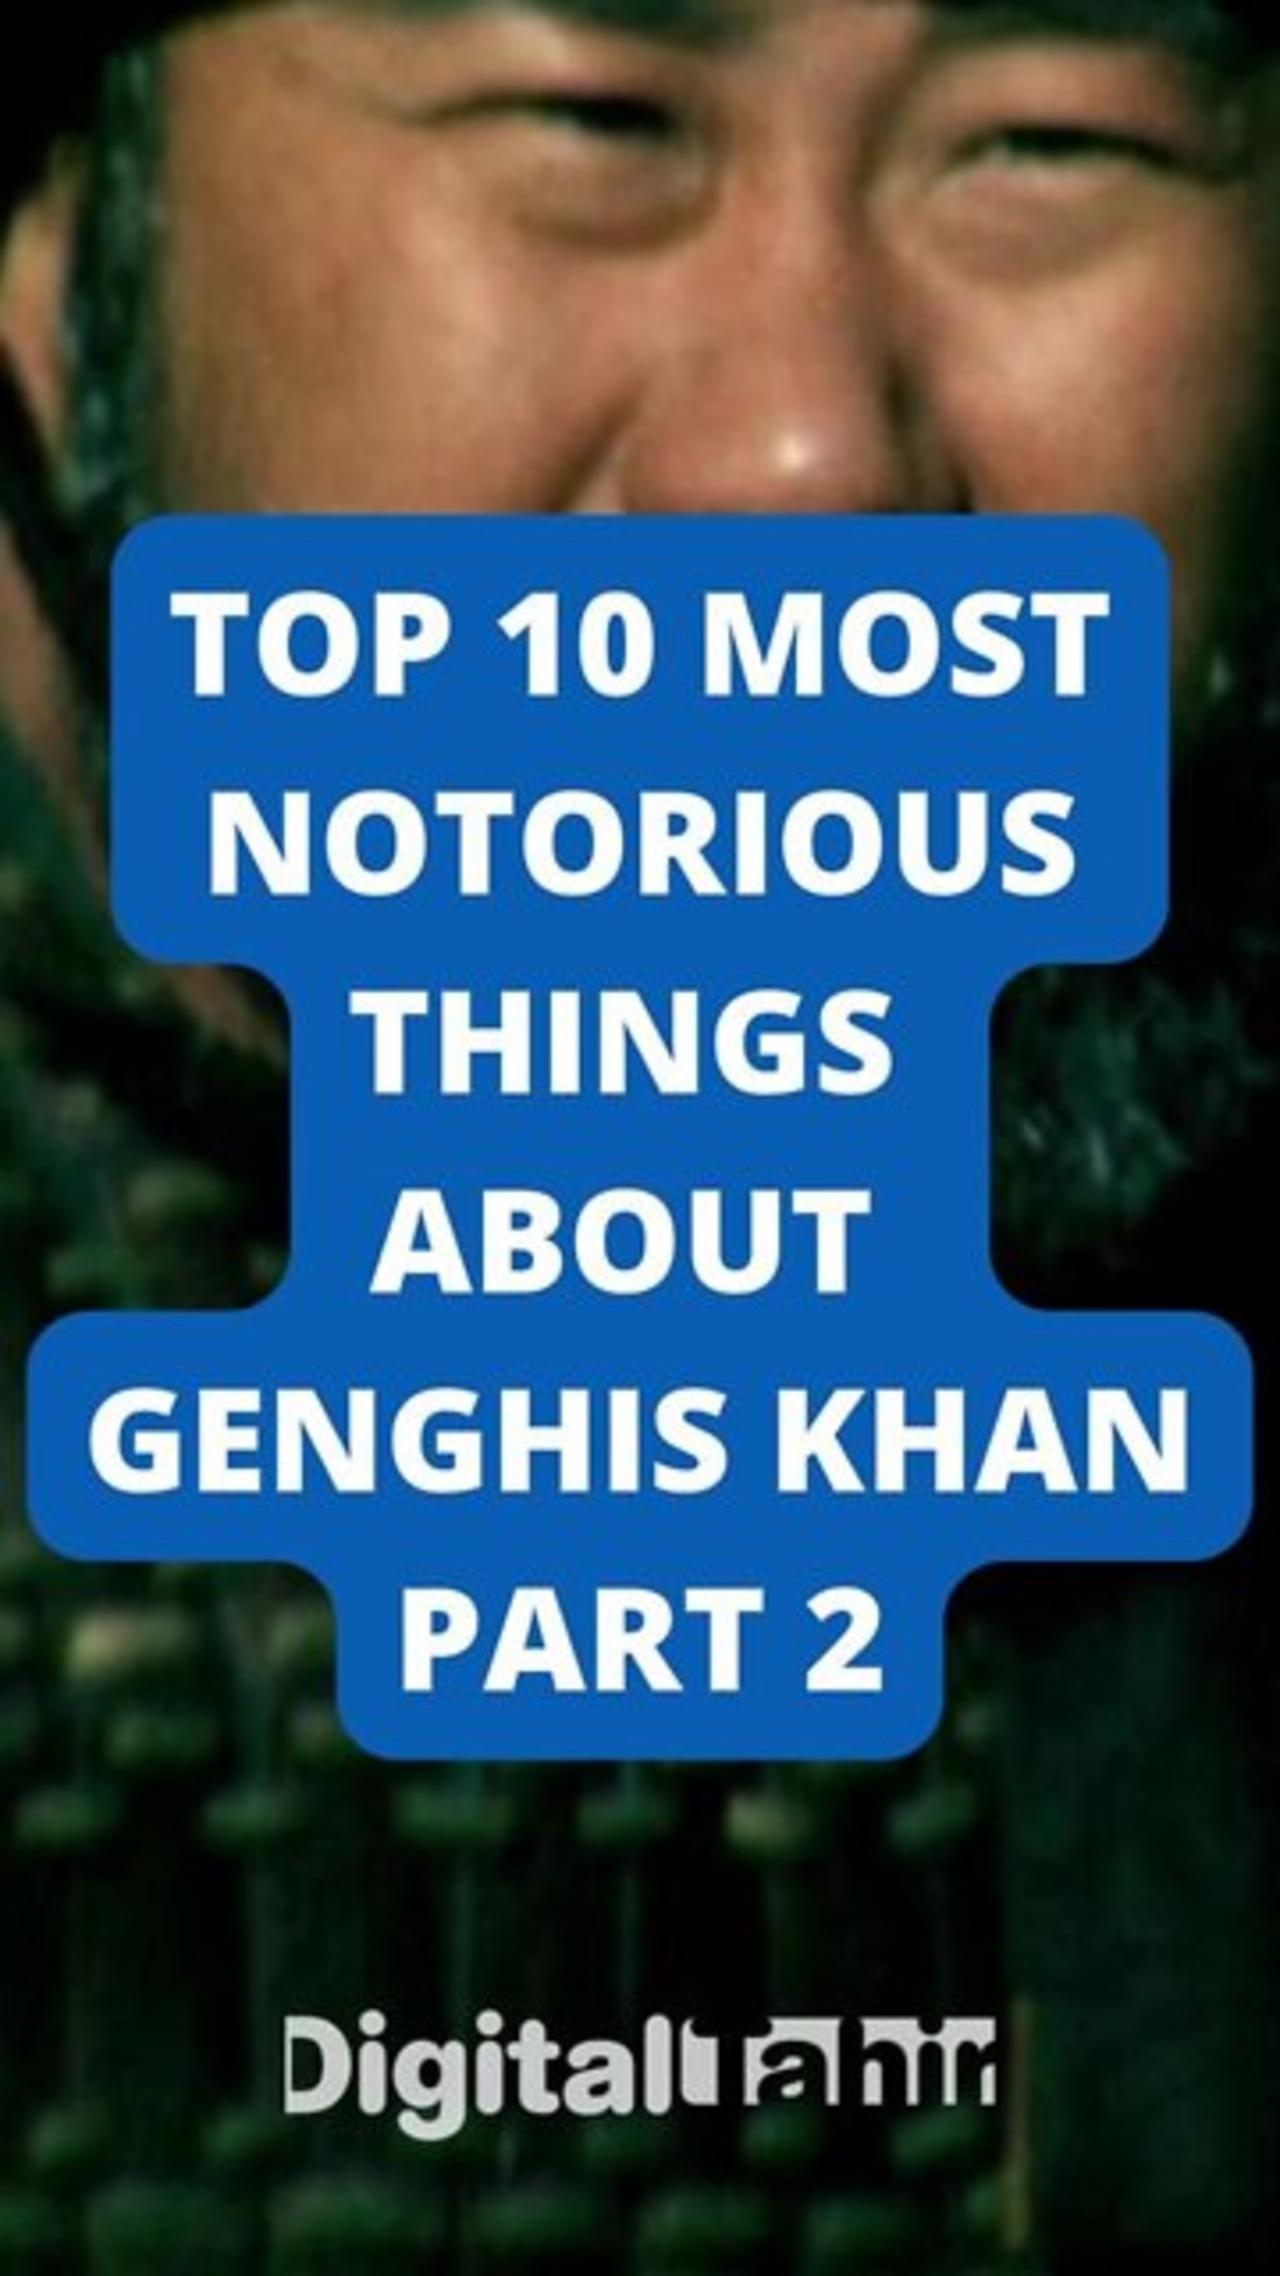 Top 10 Most Notorious Things About Genghis Khan Part 2